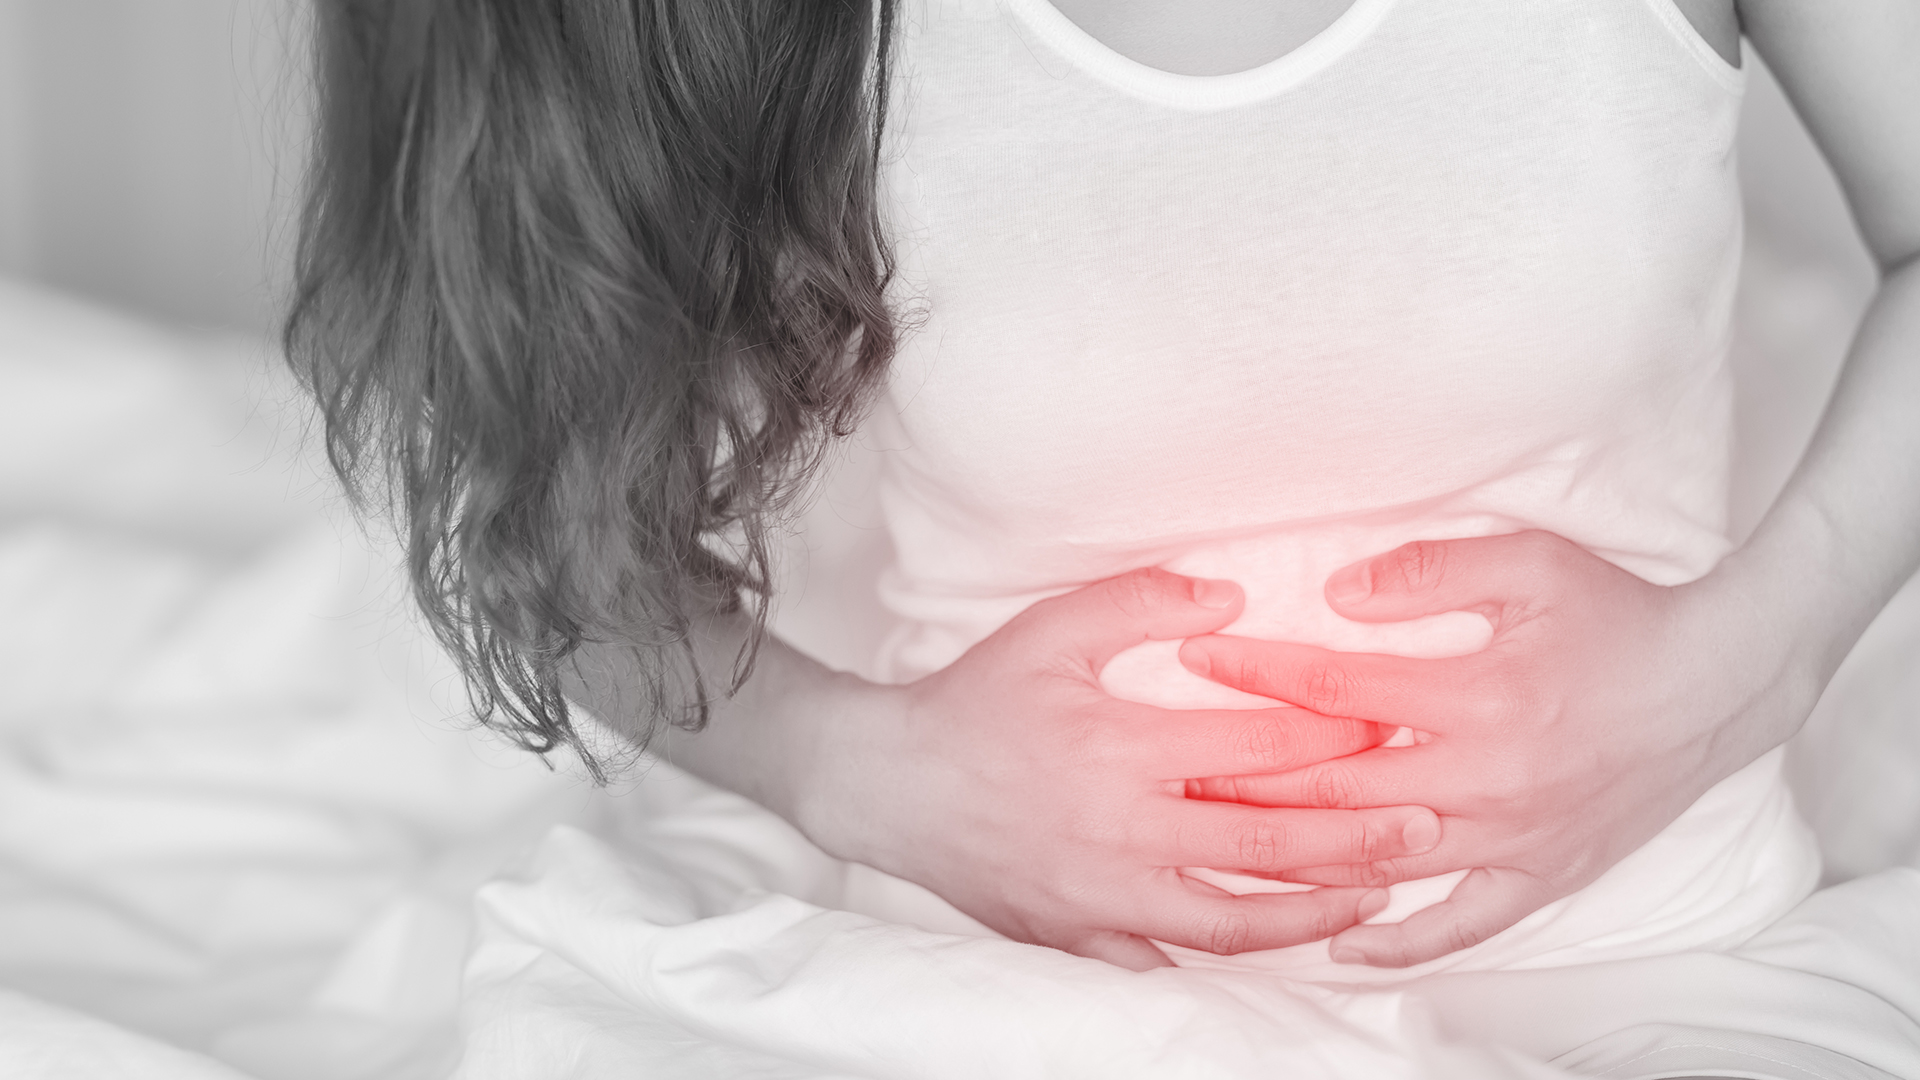 Woman with chronic constipation should join a clinical trial